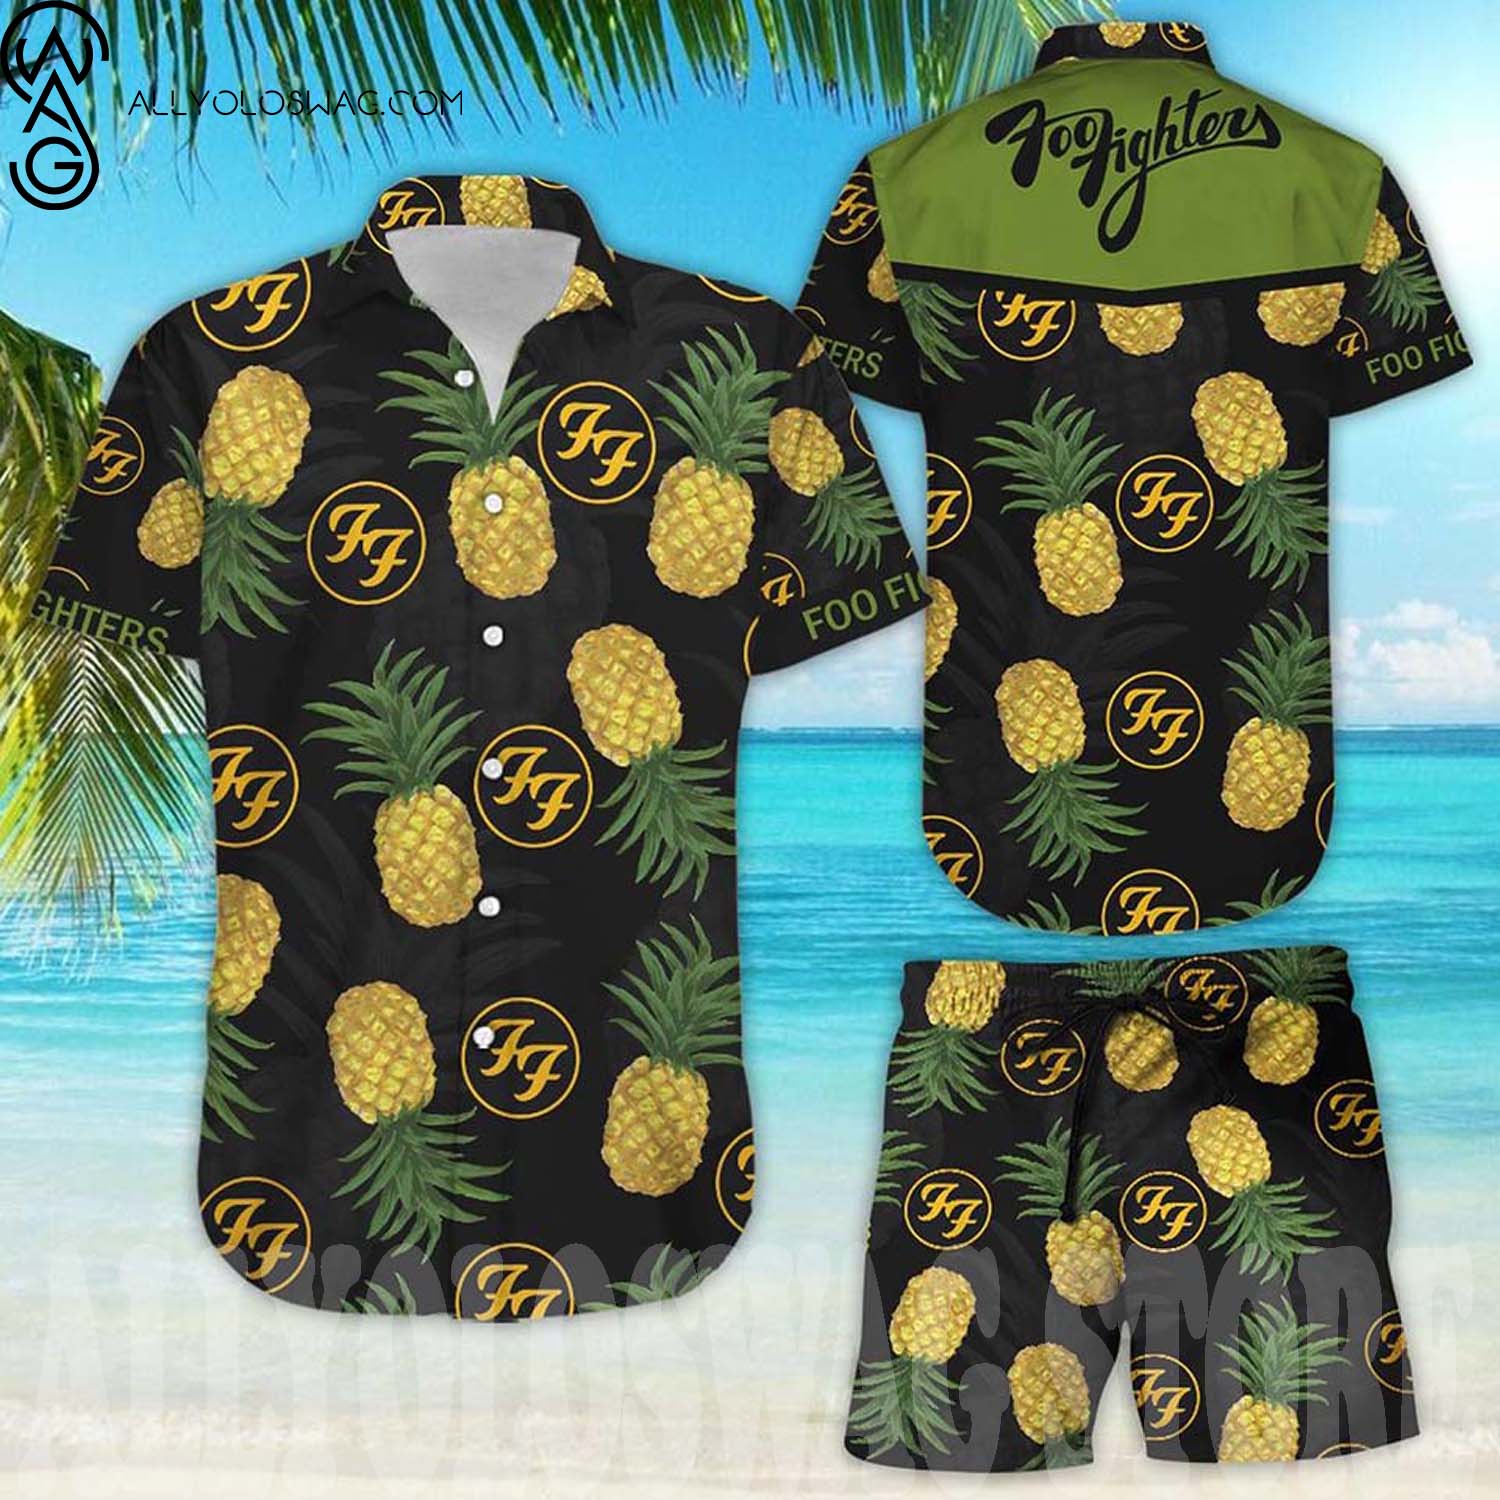 Let's talk about the Foo Fighters shirt hot topic and Foo Fighters Hawaiian shirt